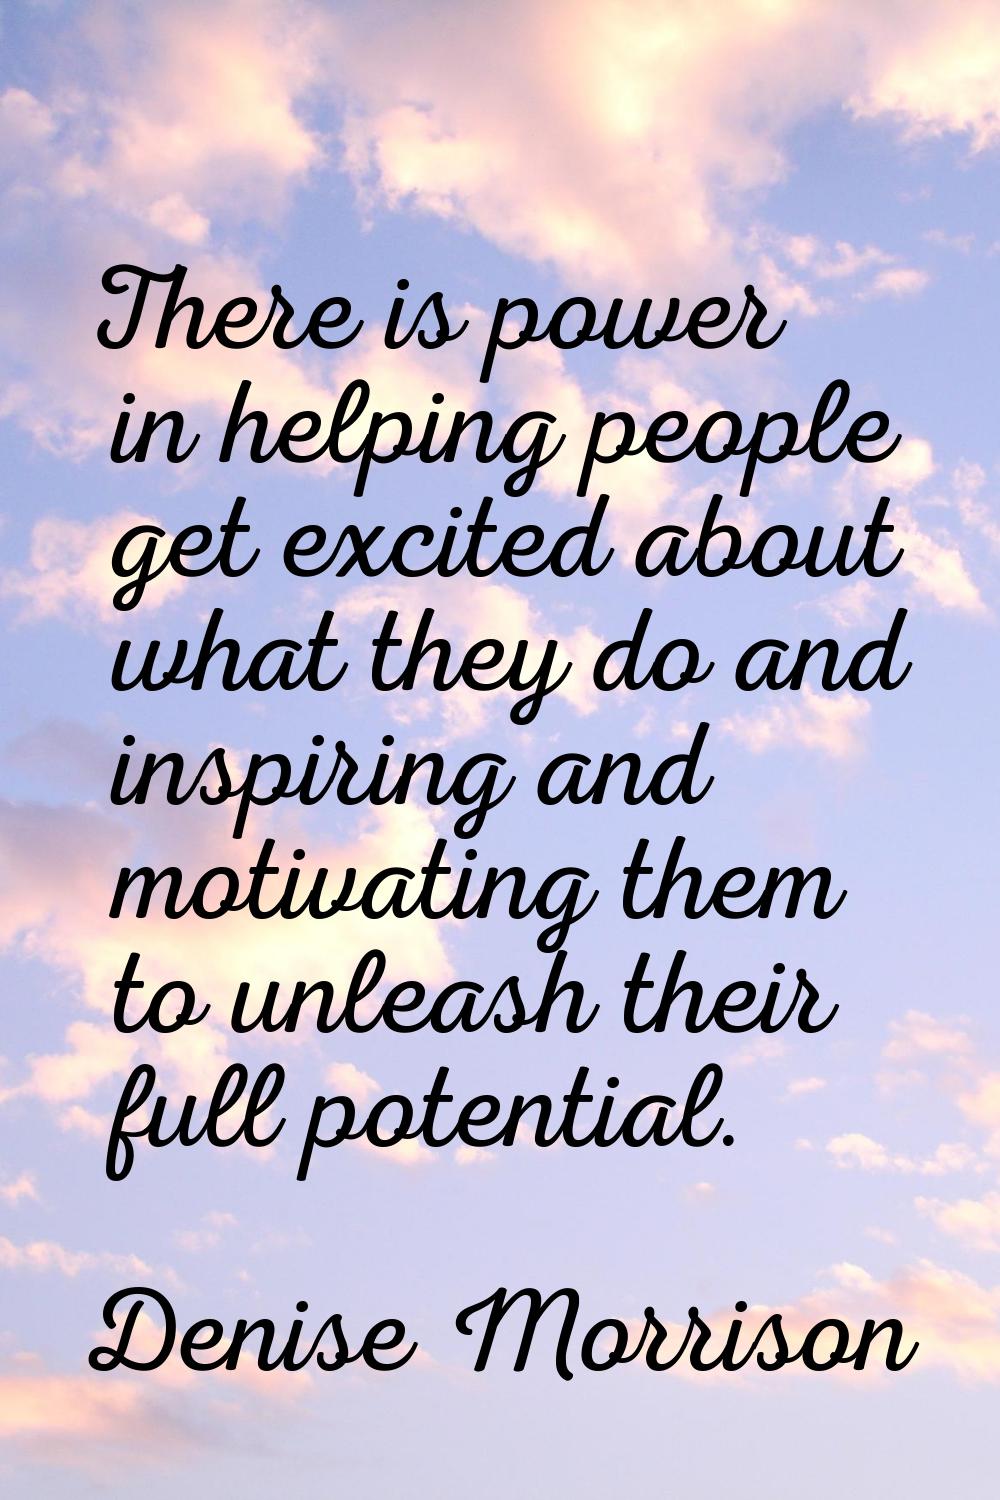 There is power in helping people get excited about what they do and inspiring and motivating them t